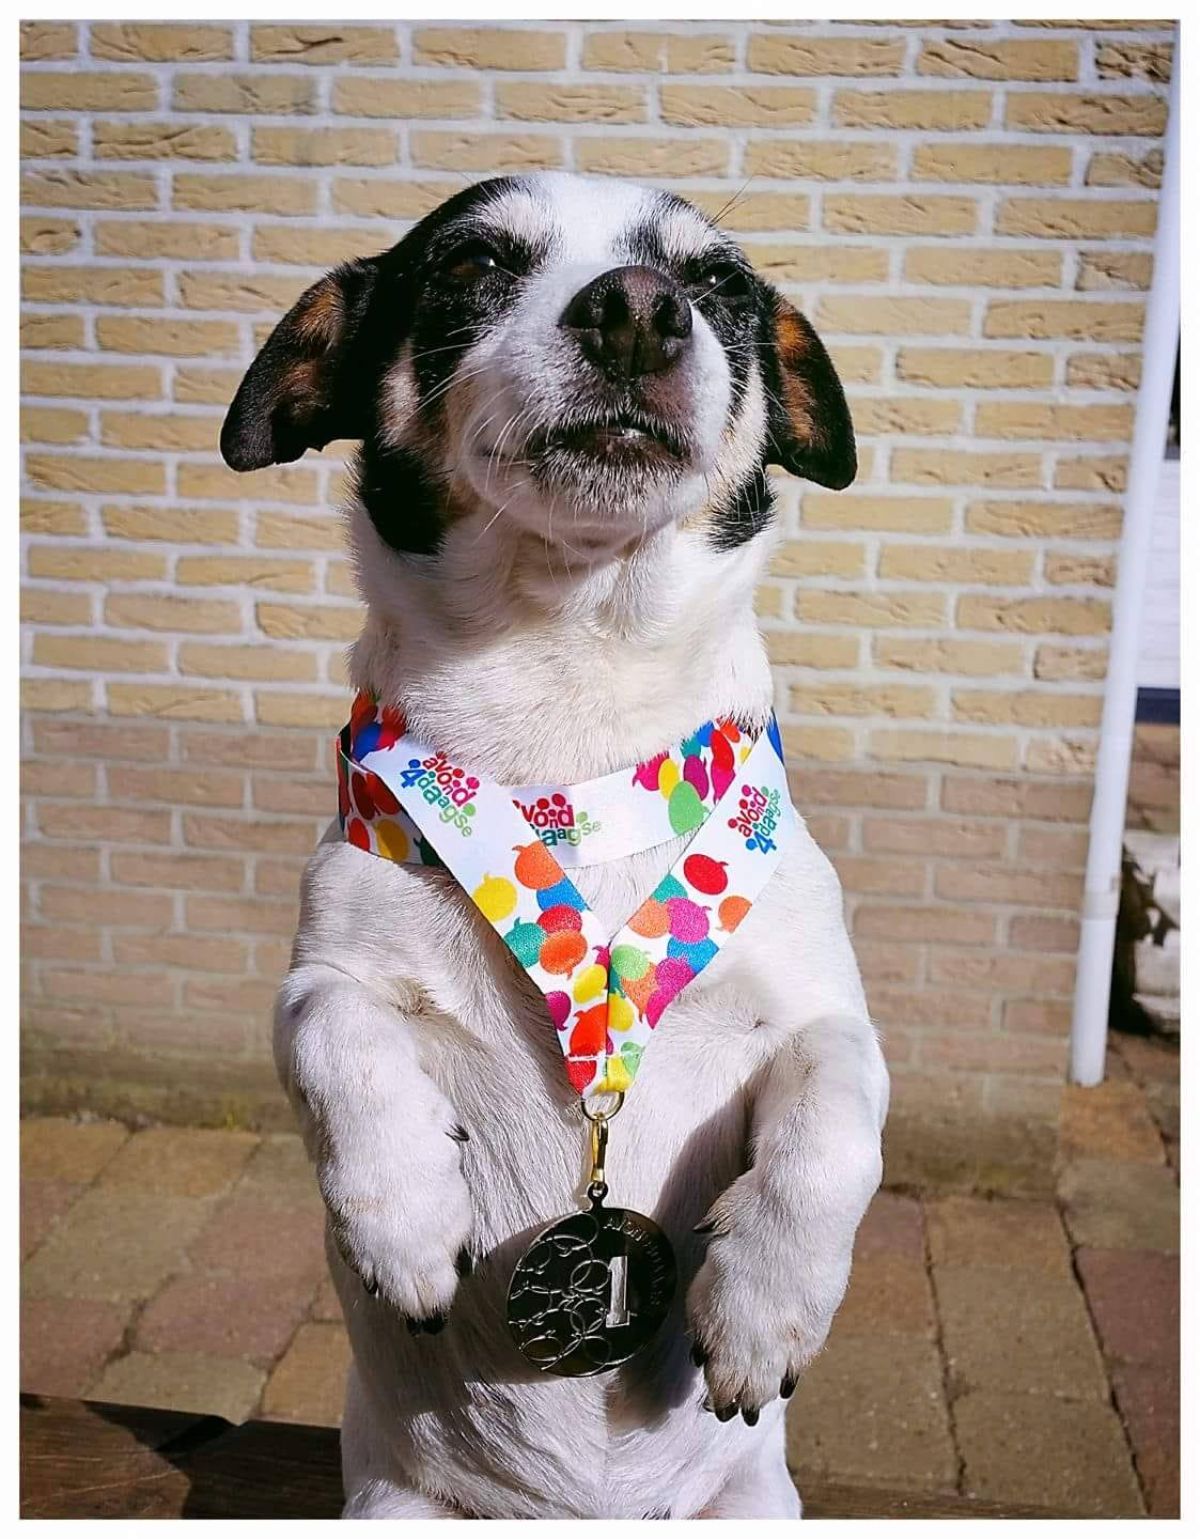 white black and brown dog wearing a colourful collar and a silver 1st place medal